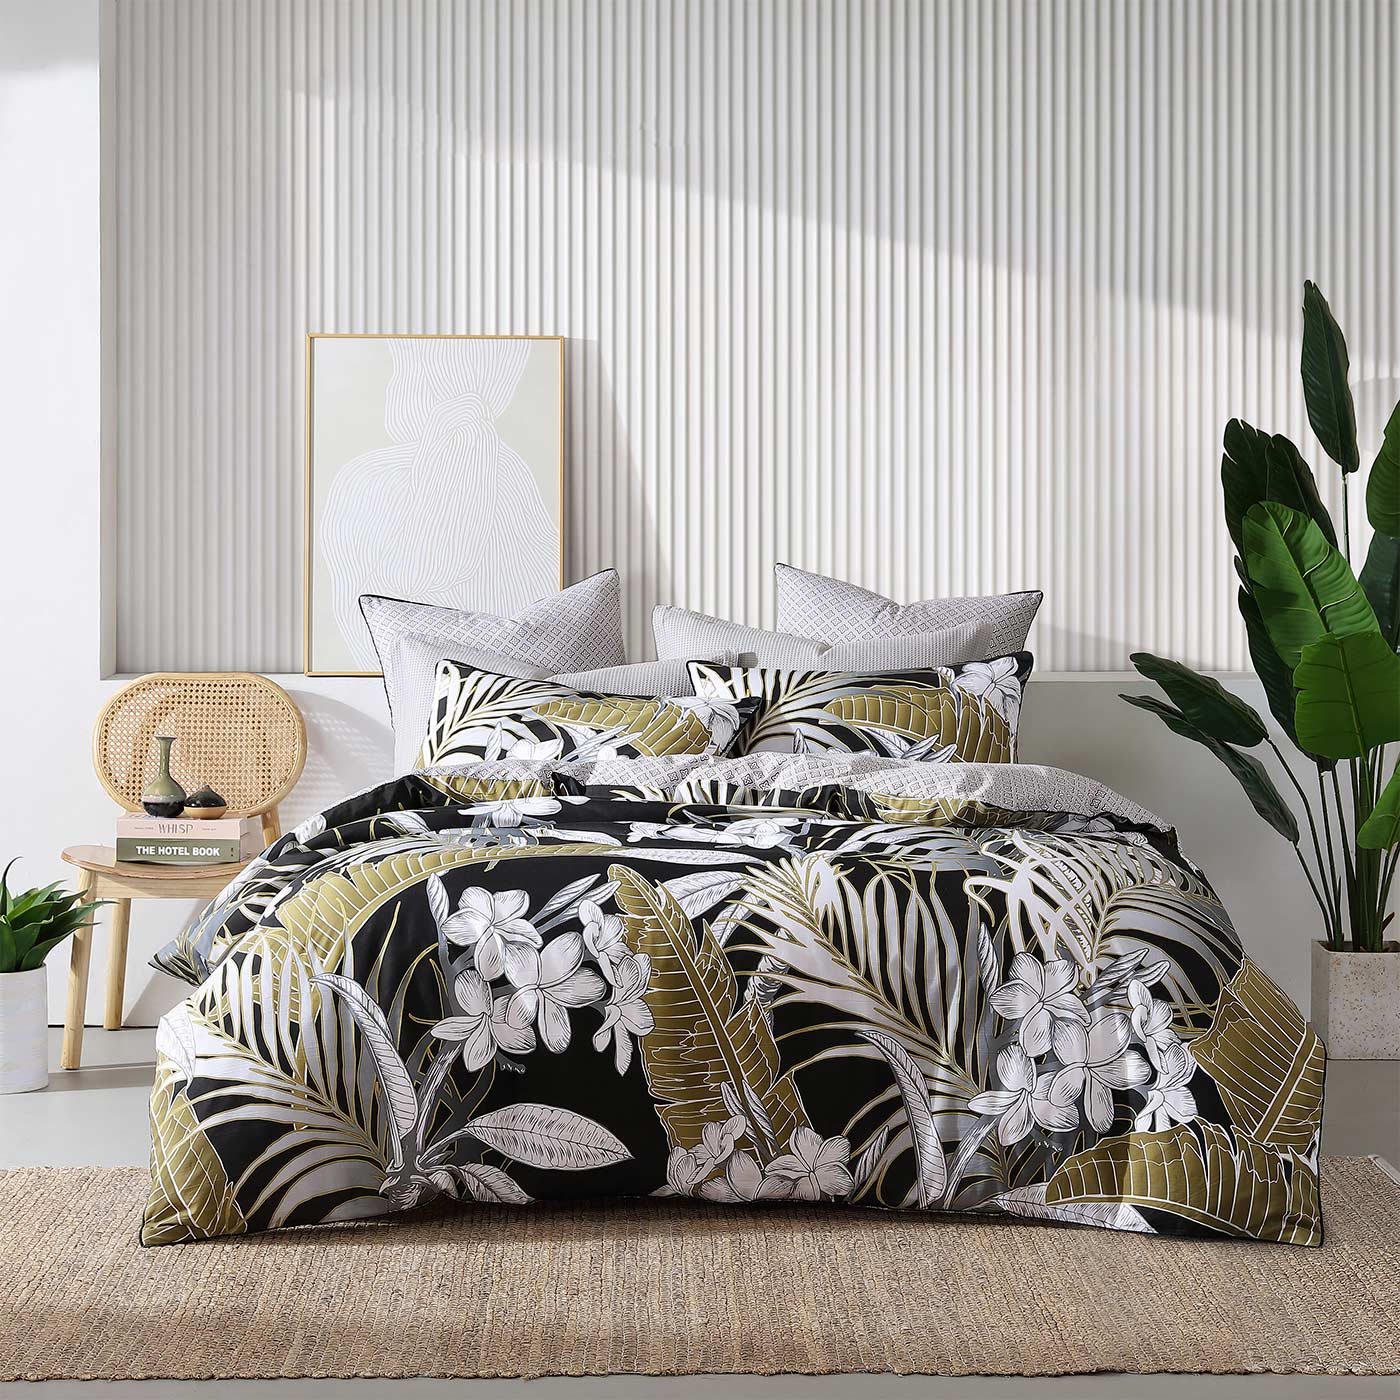 Tariq Black uses over scaled tropical foliage to cascade across the bed in a monochromatic colourway highlighted with tarnished gold.